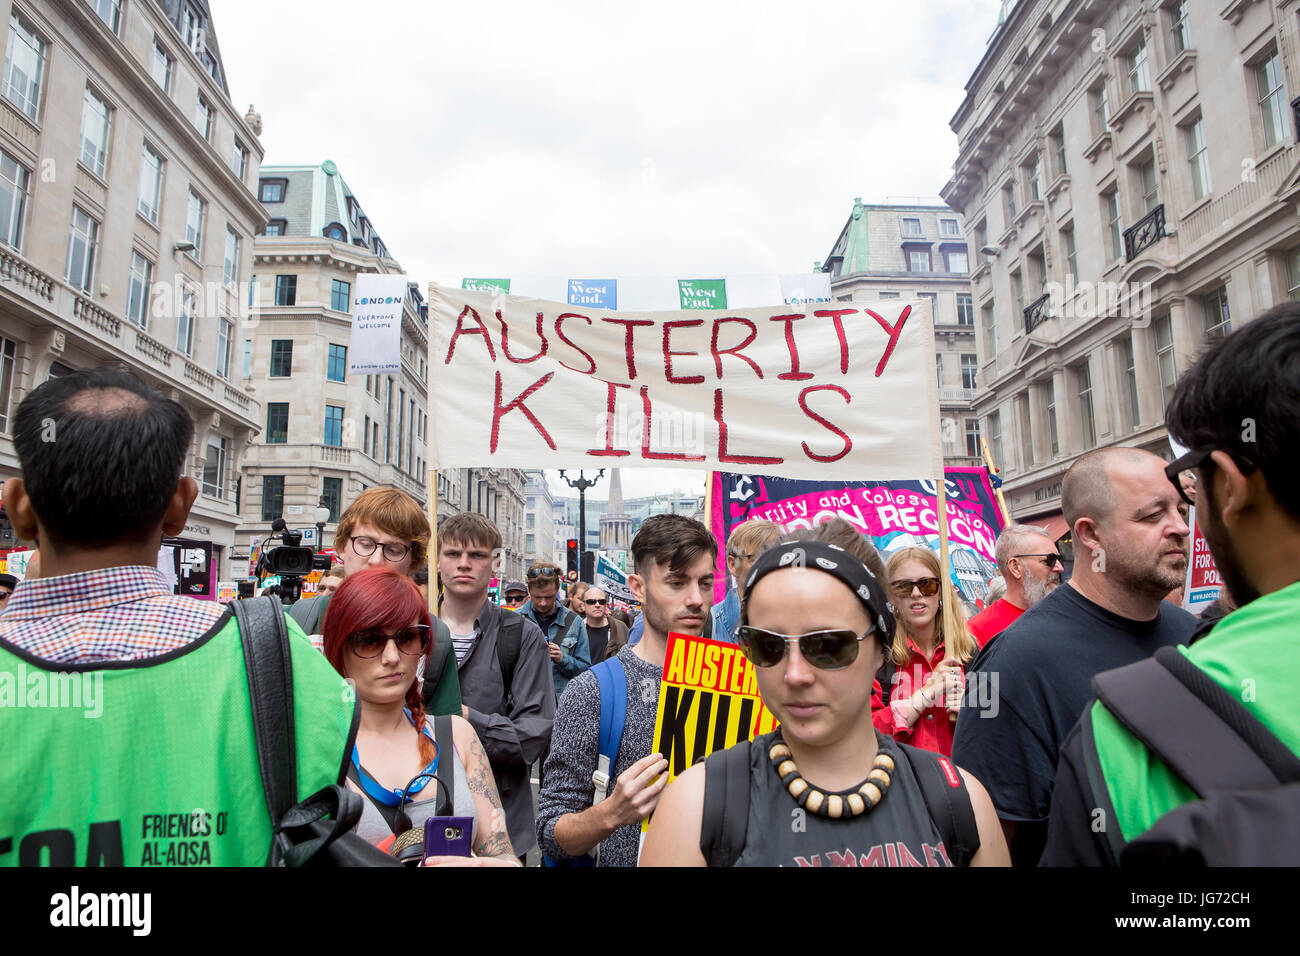 London, United KIngdom - July 1, 2017: Austerity Kills. A march was held in the centre of London to protest the government's continuing austerity meas Stock Photo